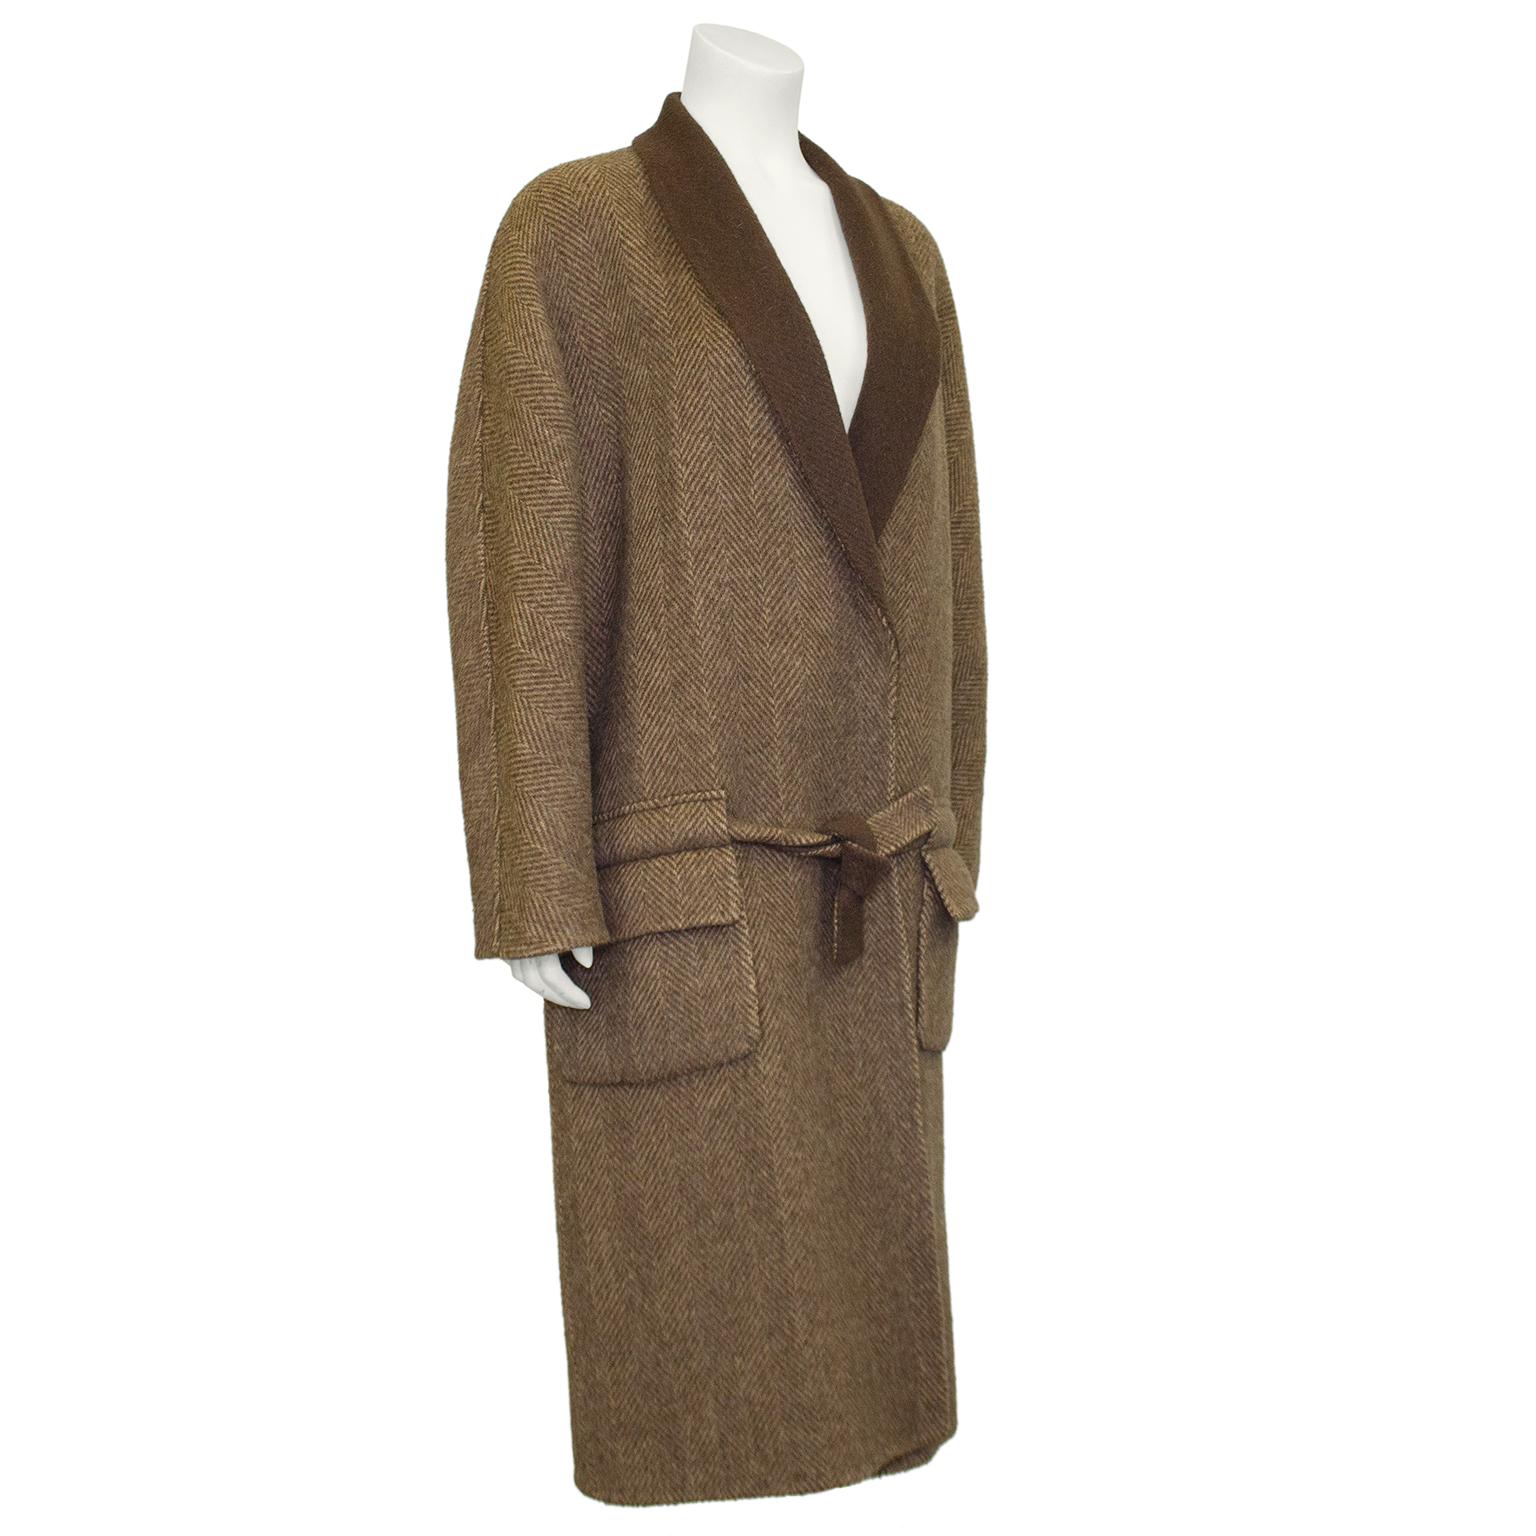 Chic and understated brown and cream wool herringbone Roberta di Camerino bathrobe inspired coat. Made to fit slightly oversized with a drop waist tie belt. Large horizontal belt loops sit above the flap pockets creating an interesting design